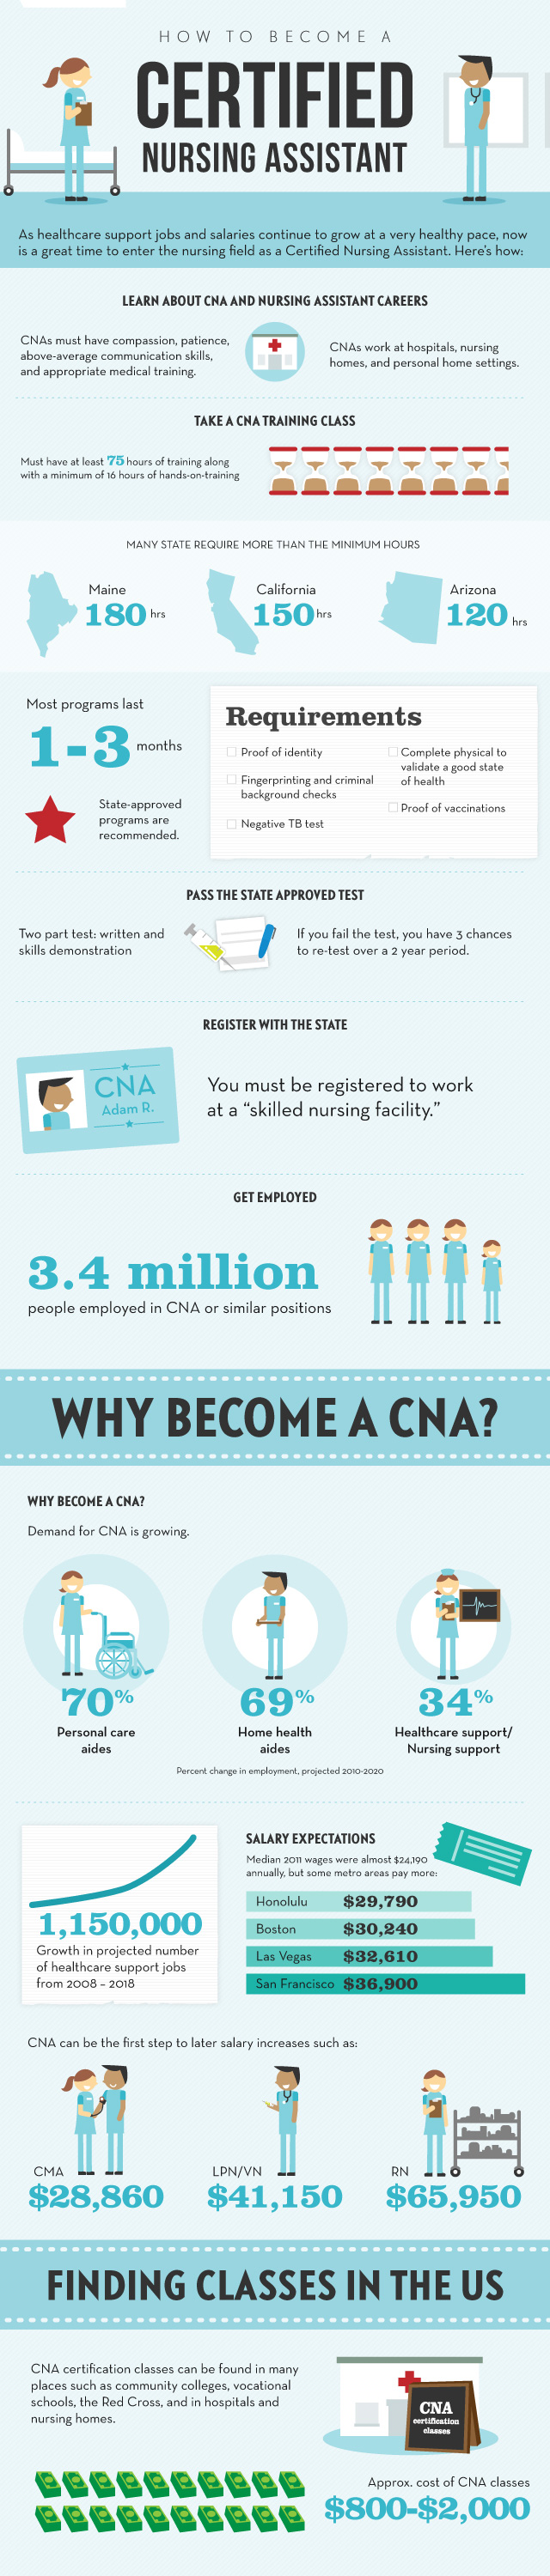 How to Become a CNA Infographic